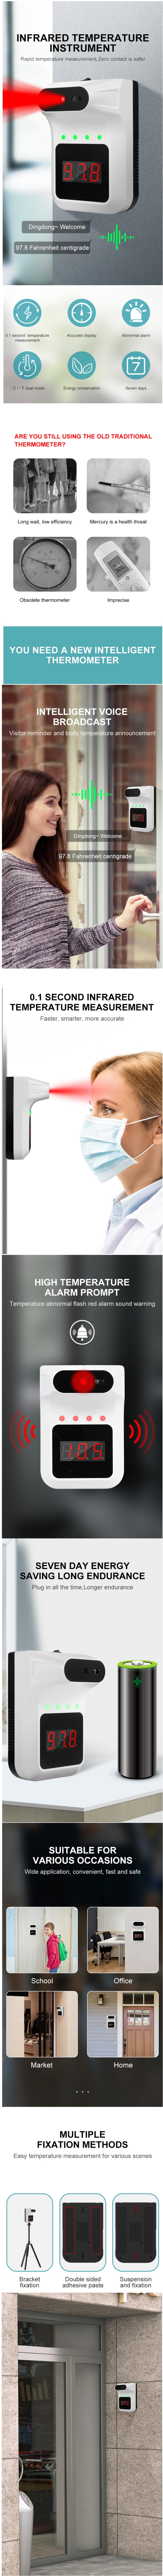 M3 Pro Thermometer Factory, M3 Pro Wall Mount Handsfree Thermometer, M3 Pro Automatic Thermometer, M3 Pro Forehead Thermometer, M3 Pro Temperature Fever Detector Measurement Factory,